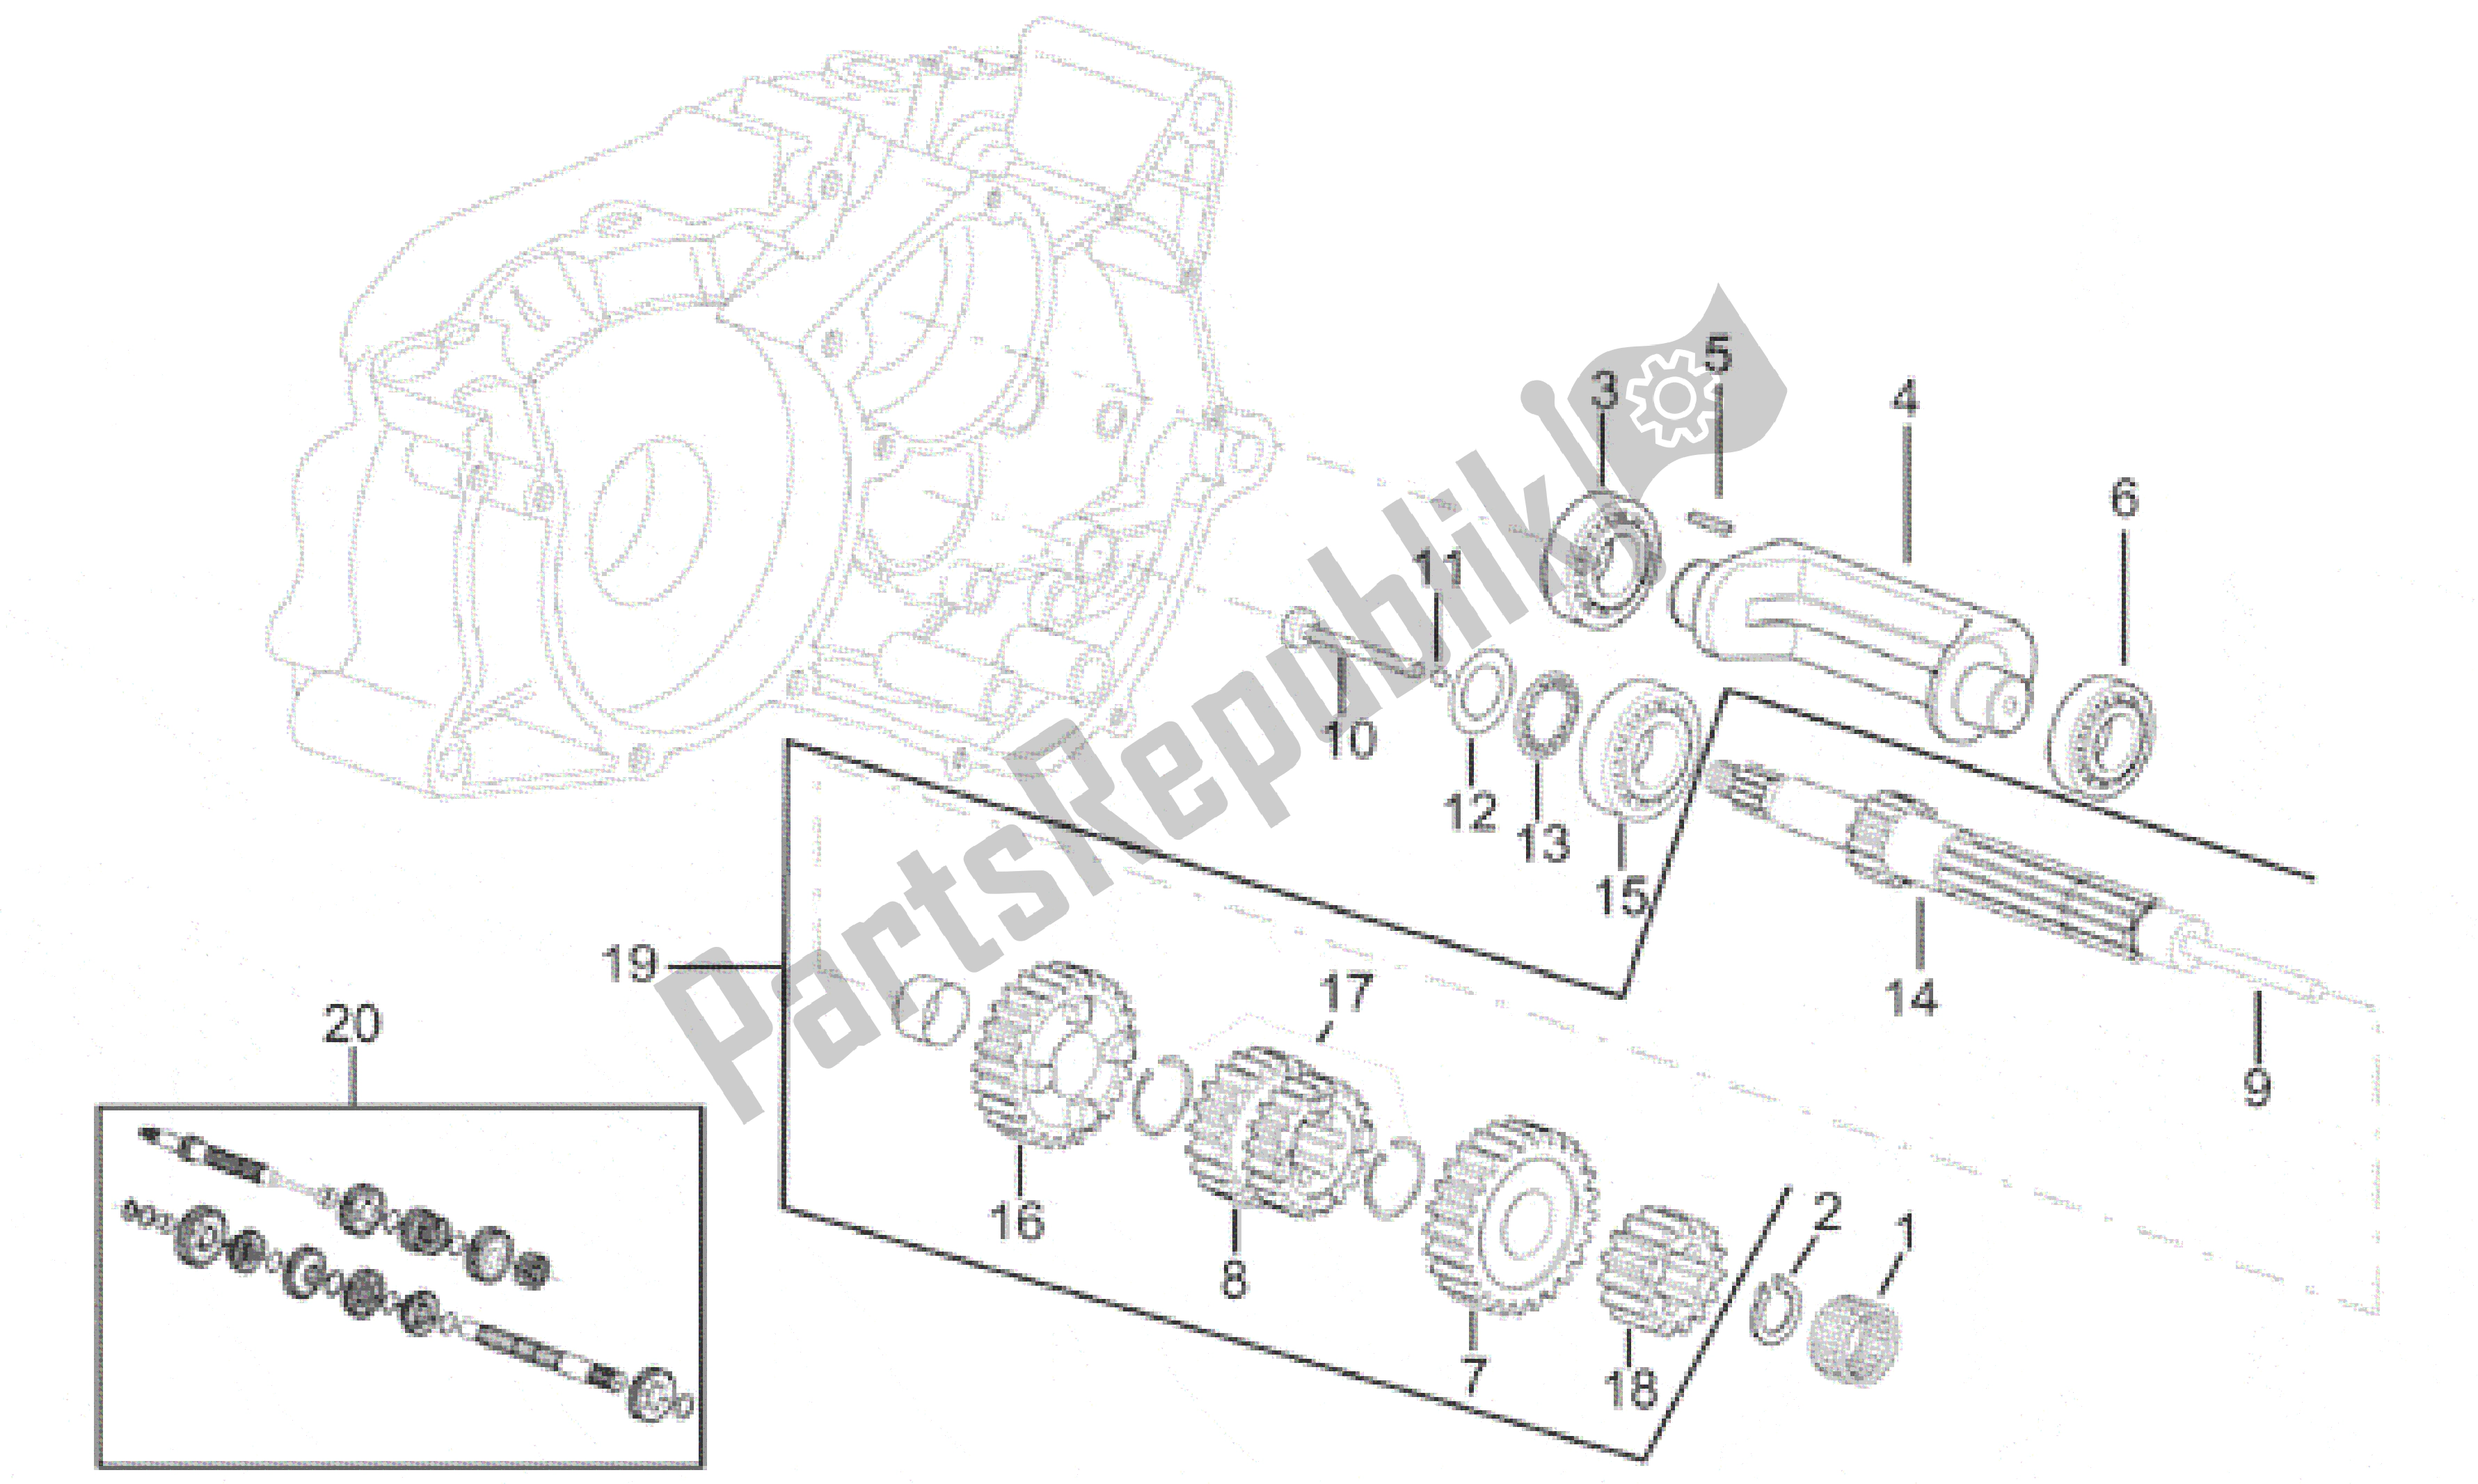 All parts for the Primary Gear Shaft of the Aprilia RS 50 1996 - 1998